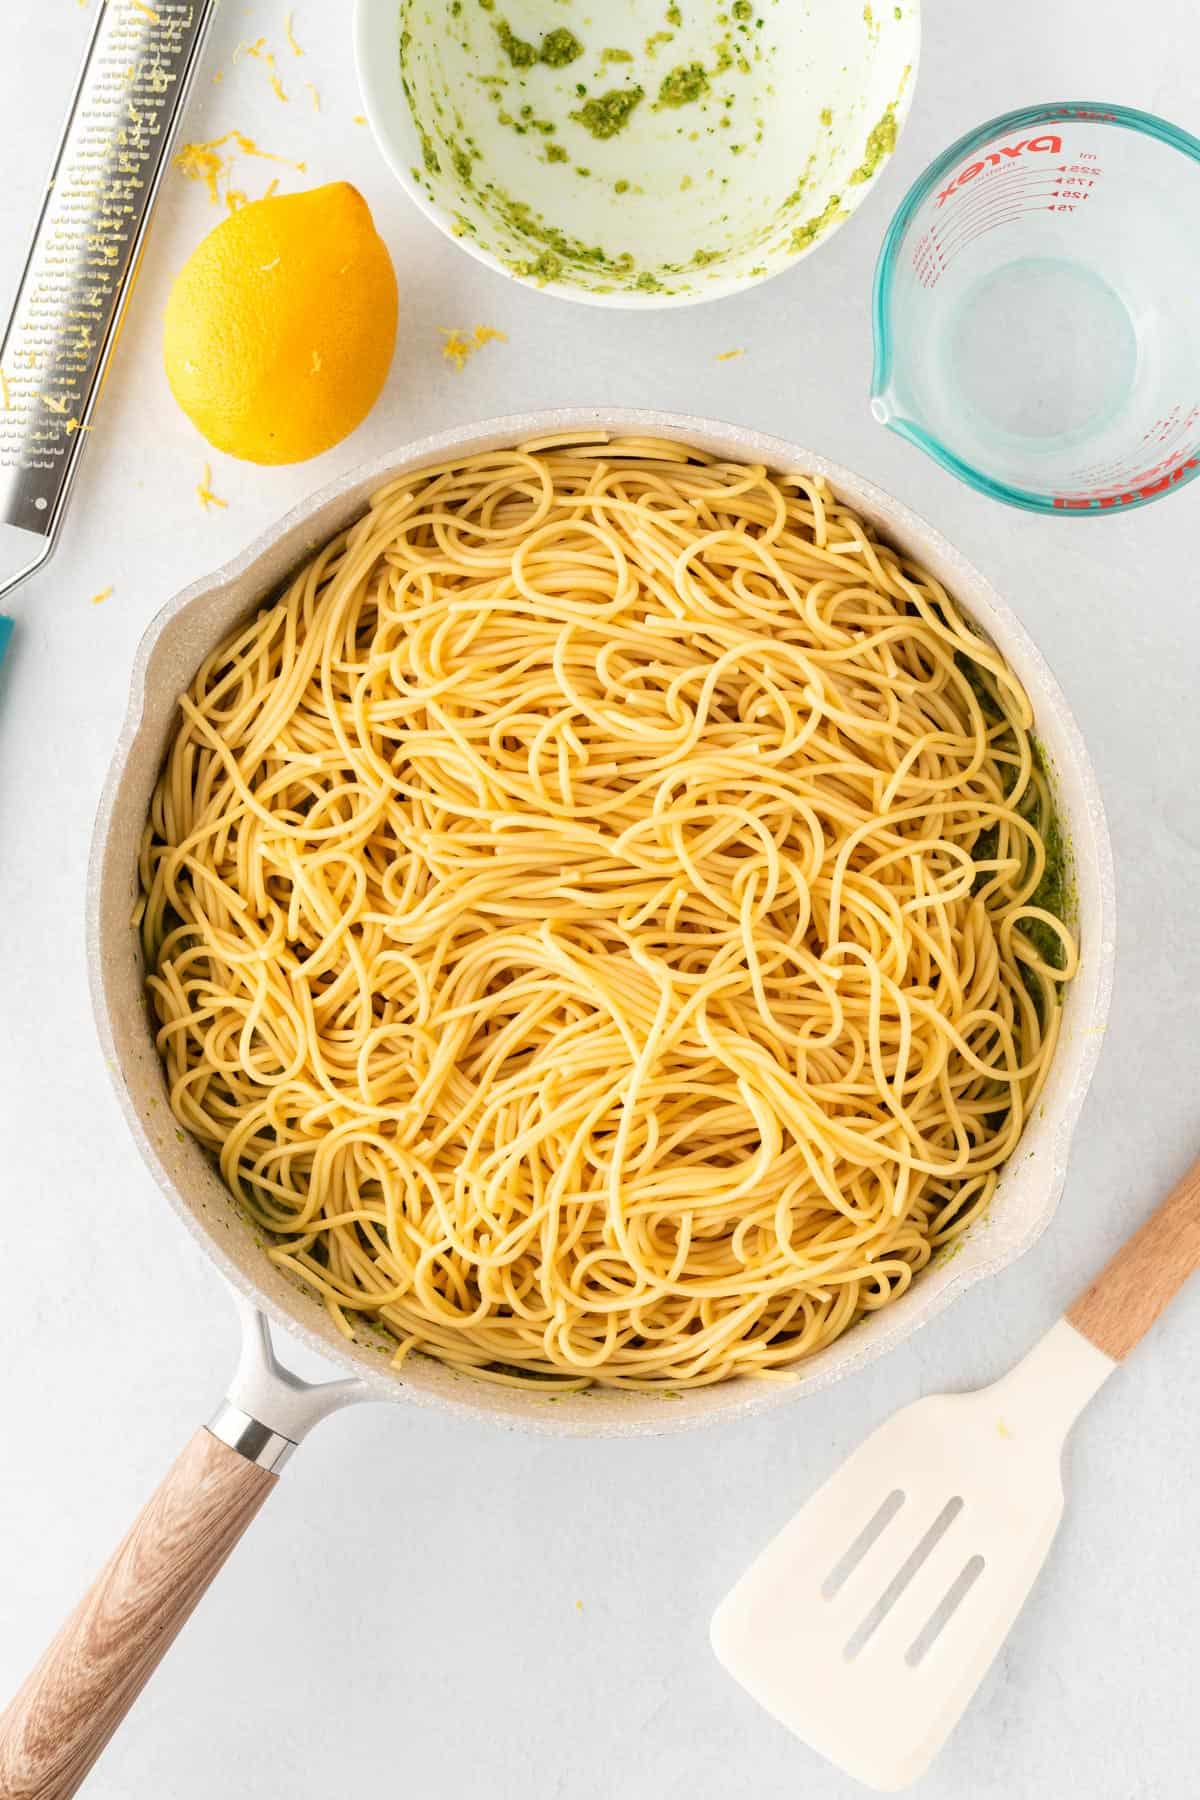 A photo of spaghetti noodles in a white skillet surrounded by a lemon and a spatula.